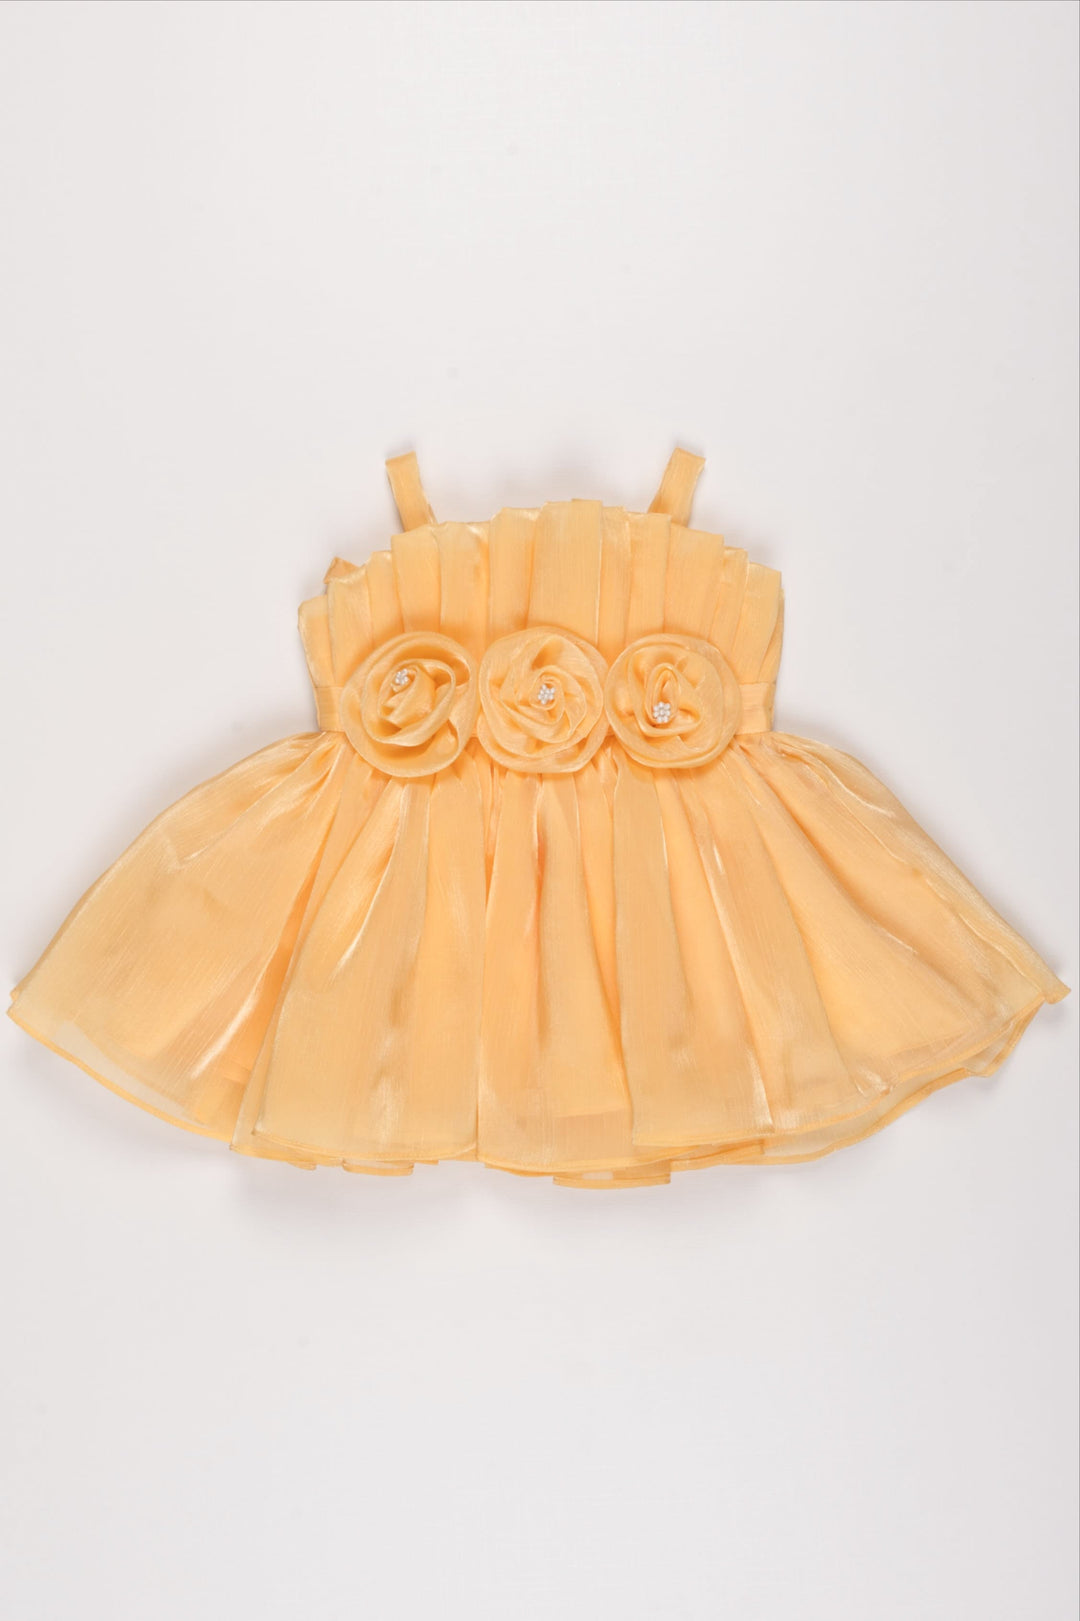 The Nesavu Girls Fancy Party Frock Golden Sunshine Yellow Organza Party Frock with Rose Embellishments for Girls Nesavu 12 (3M) / Yellow / Organza PF173B-12 Girls Yellow Organza Dress | Festive Rose Embellished Party Frock | The Nesavu